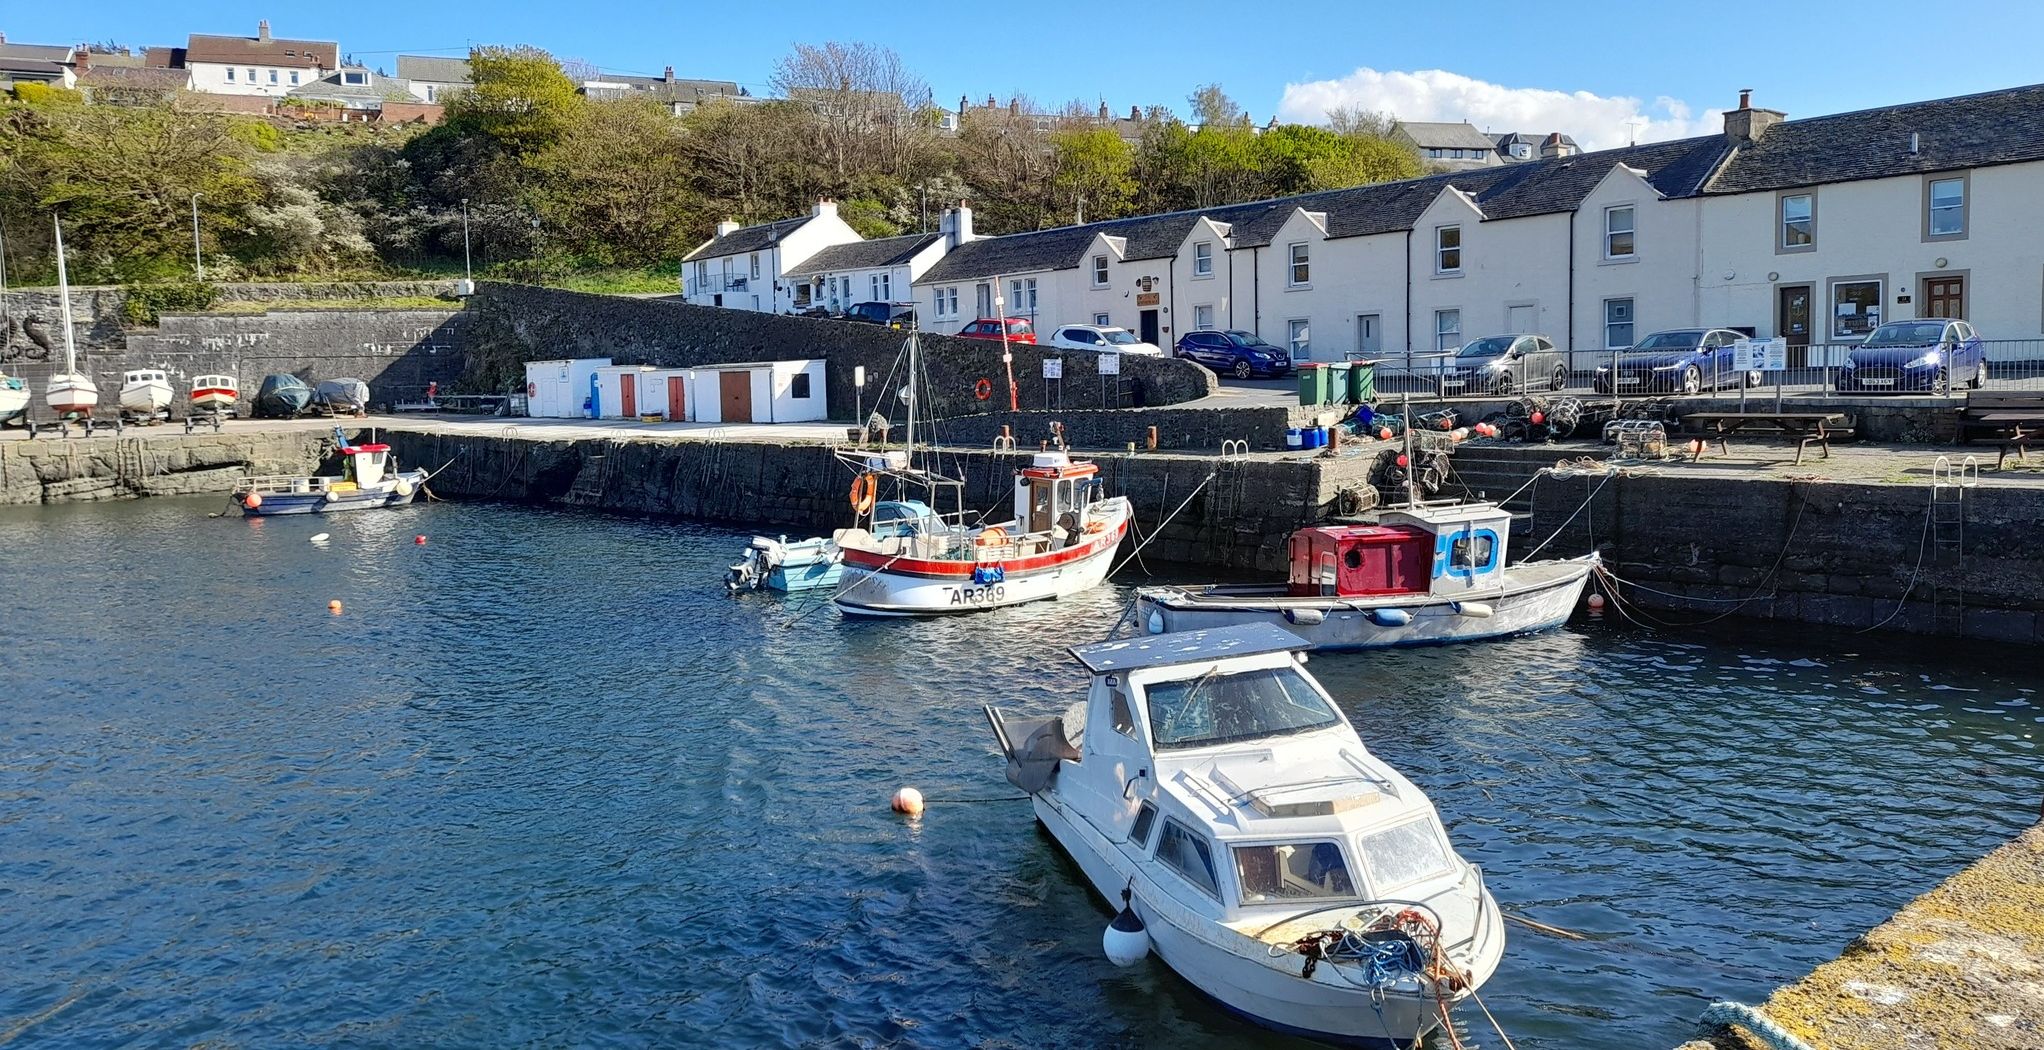 Harbour at Dunure